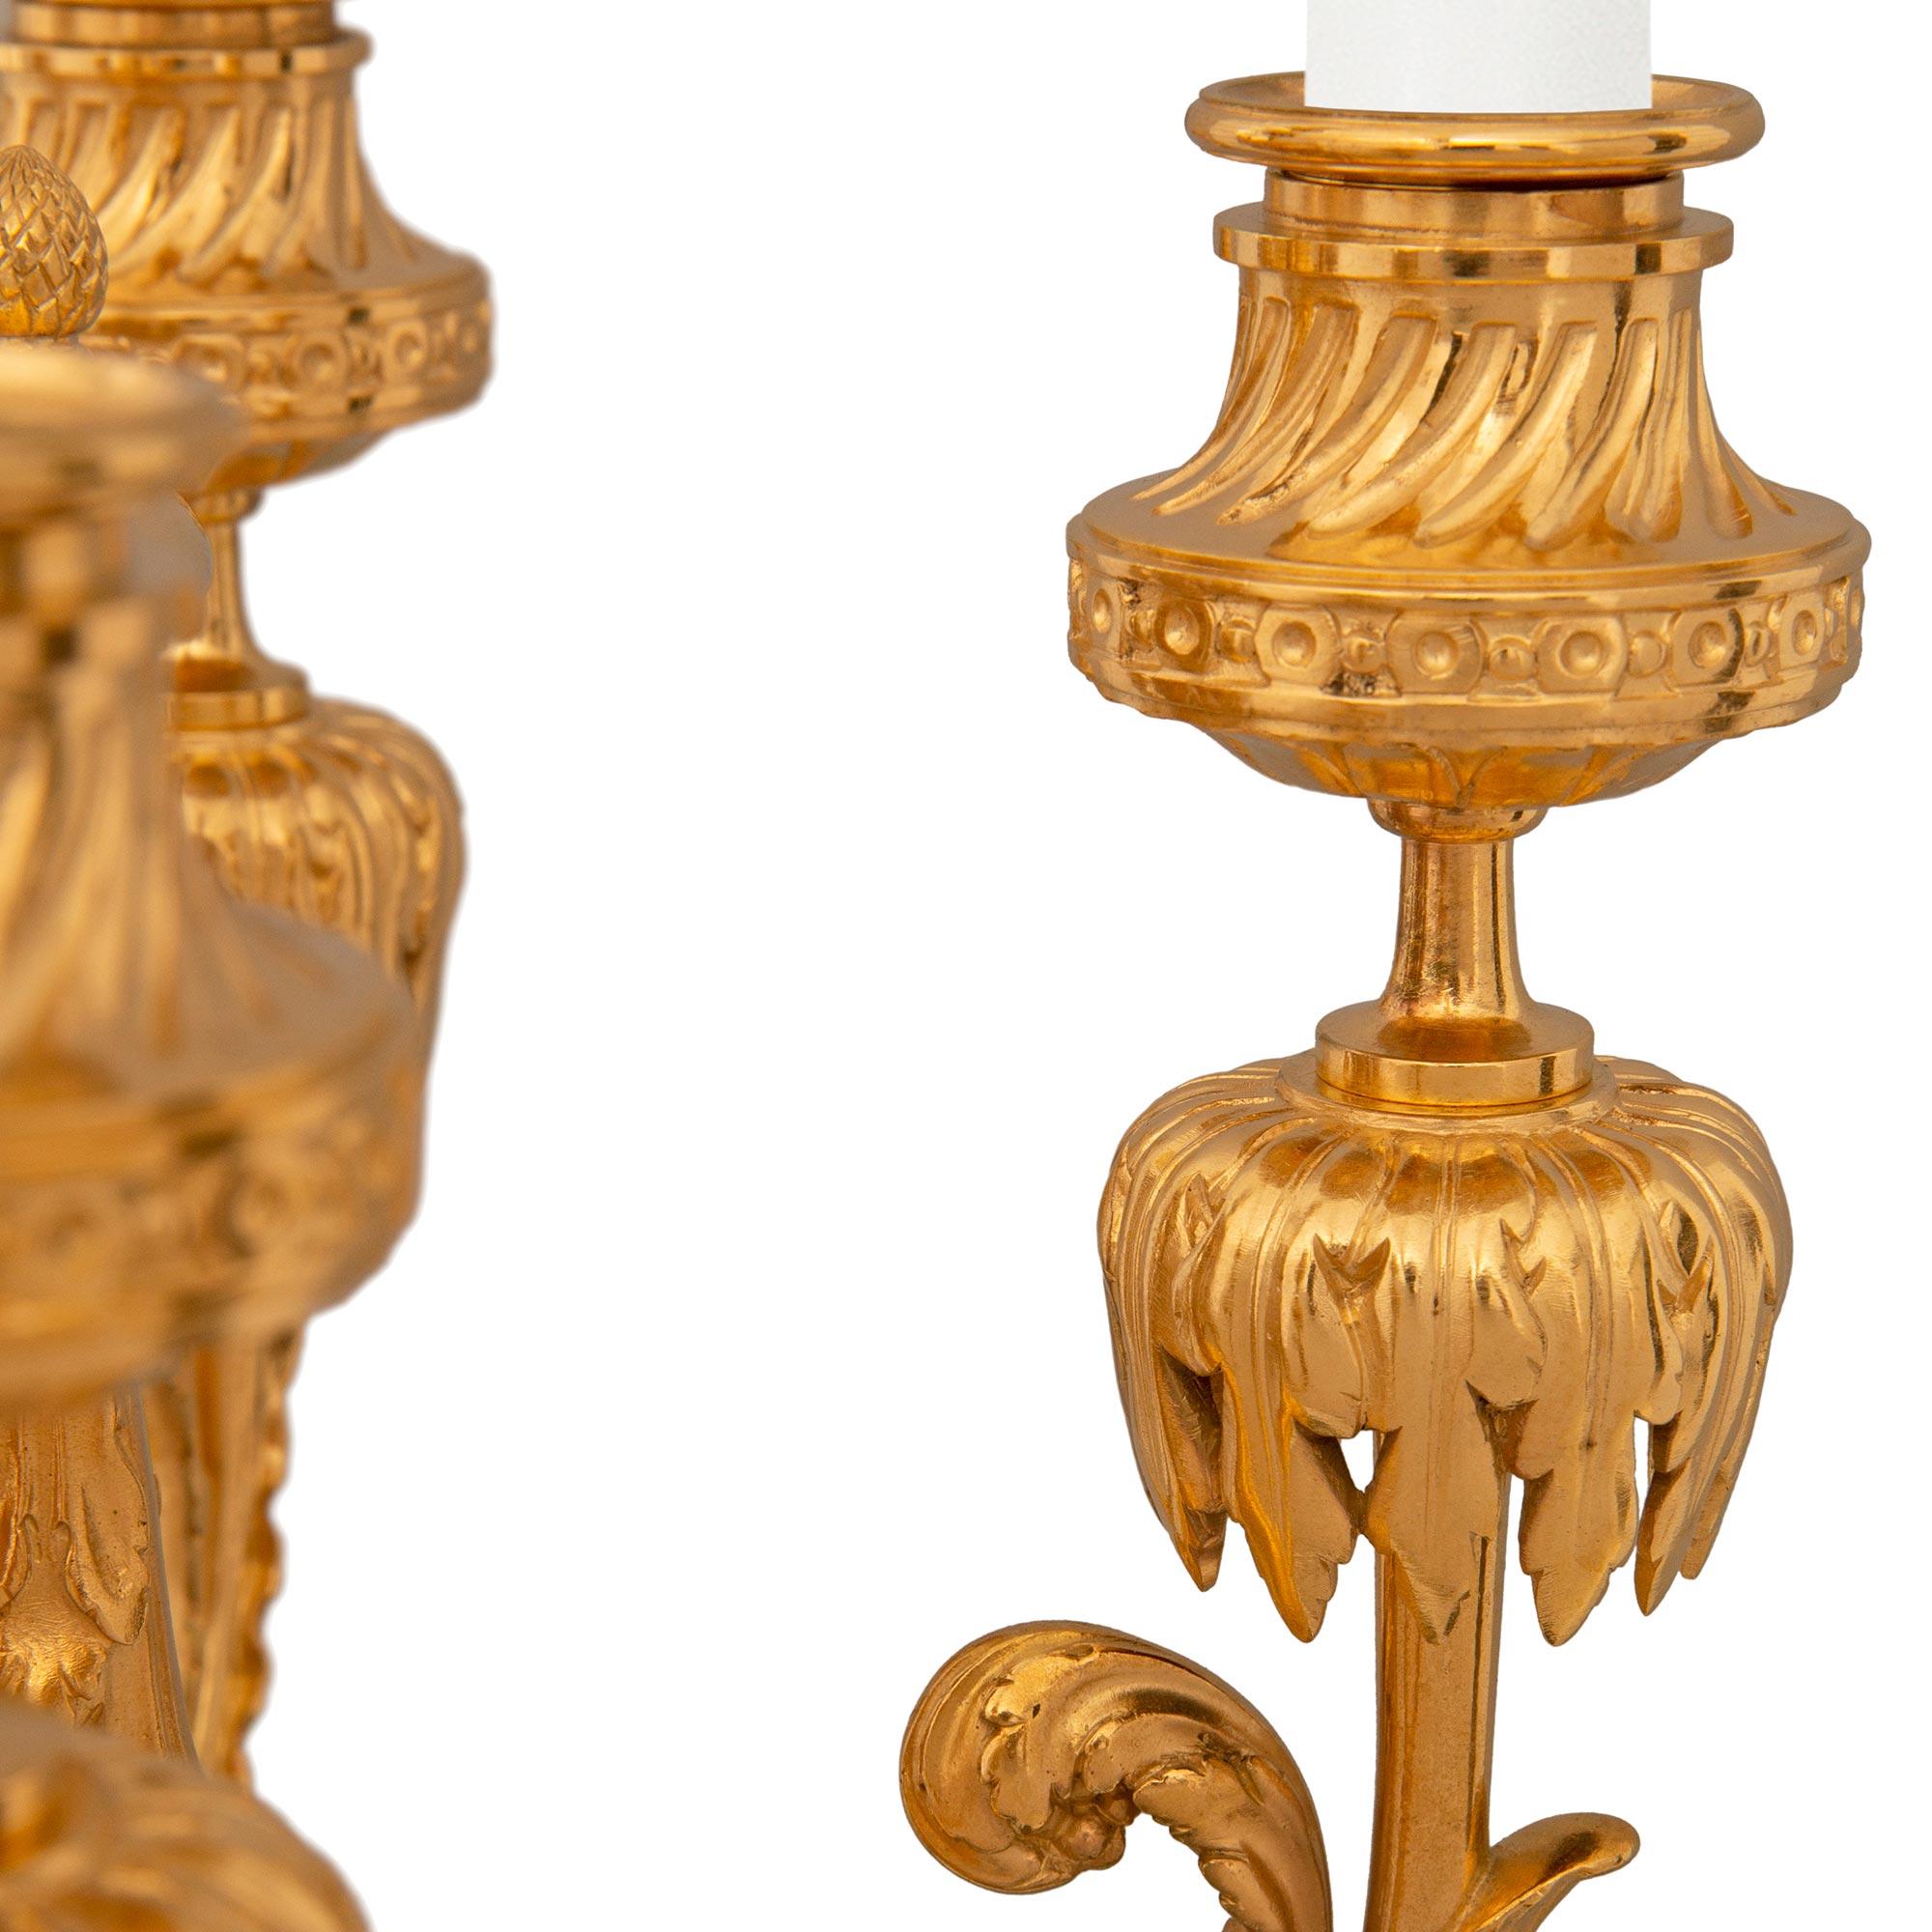 Enamel Pair Of French 19th Century Louis XV St. Cloisonné And Ormolu Candelabras For Sale